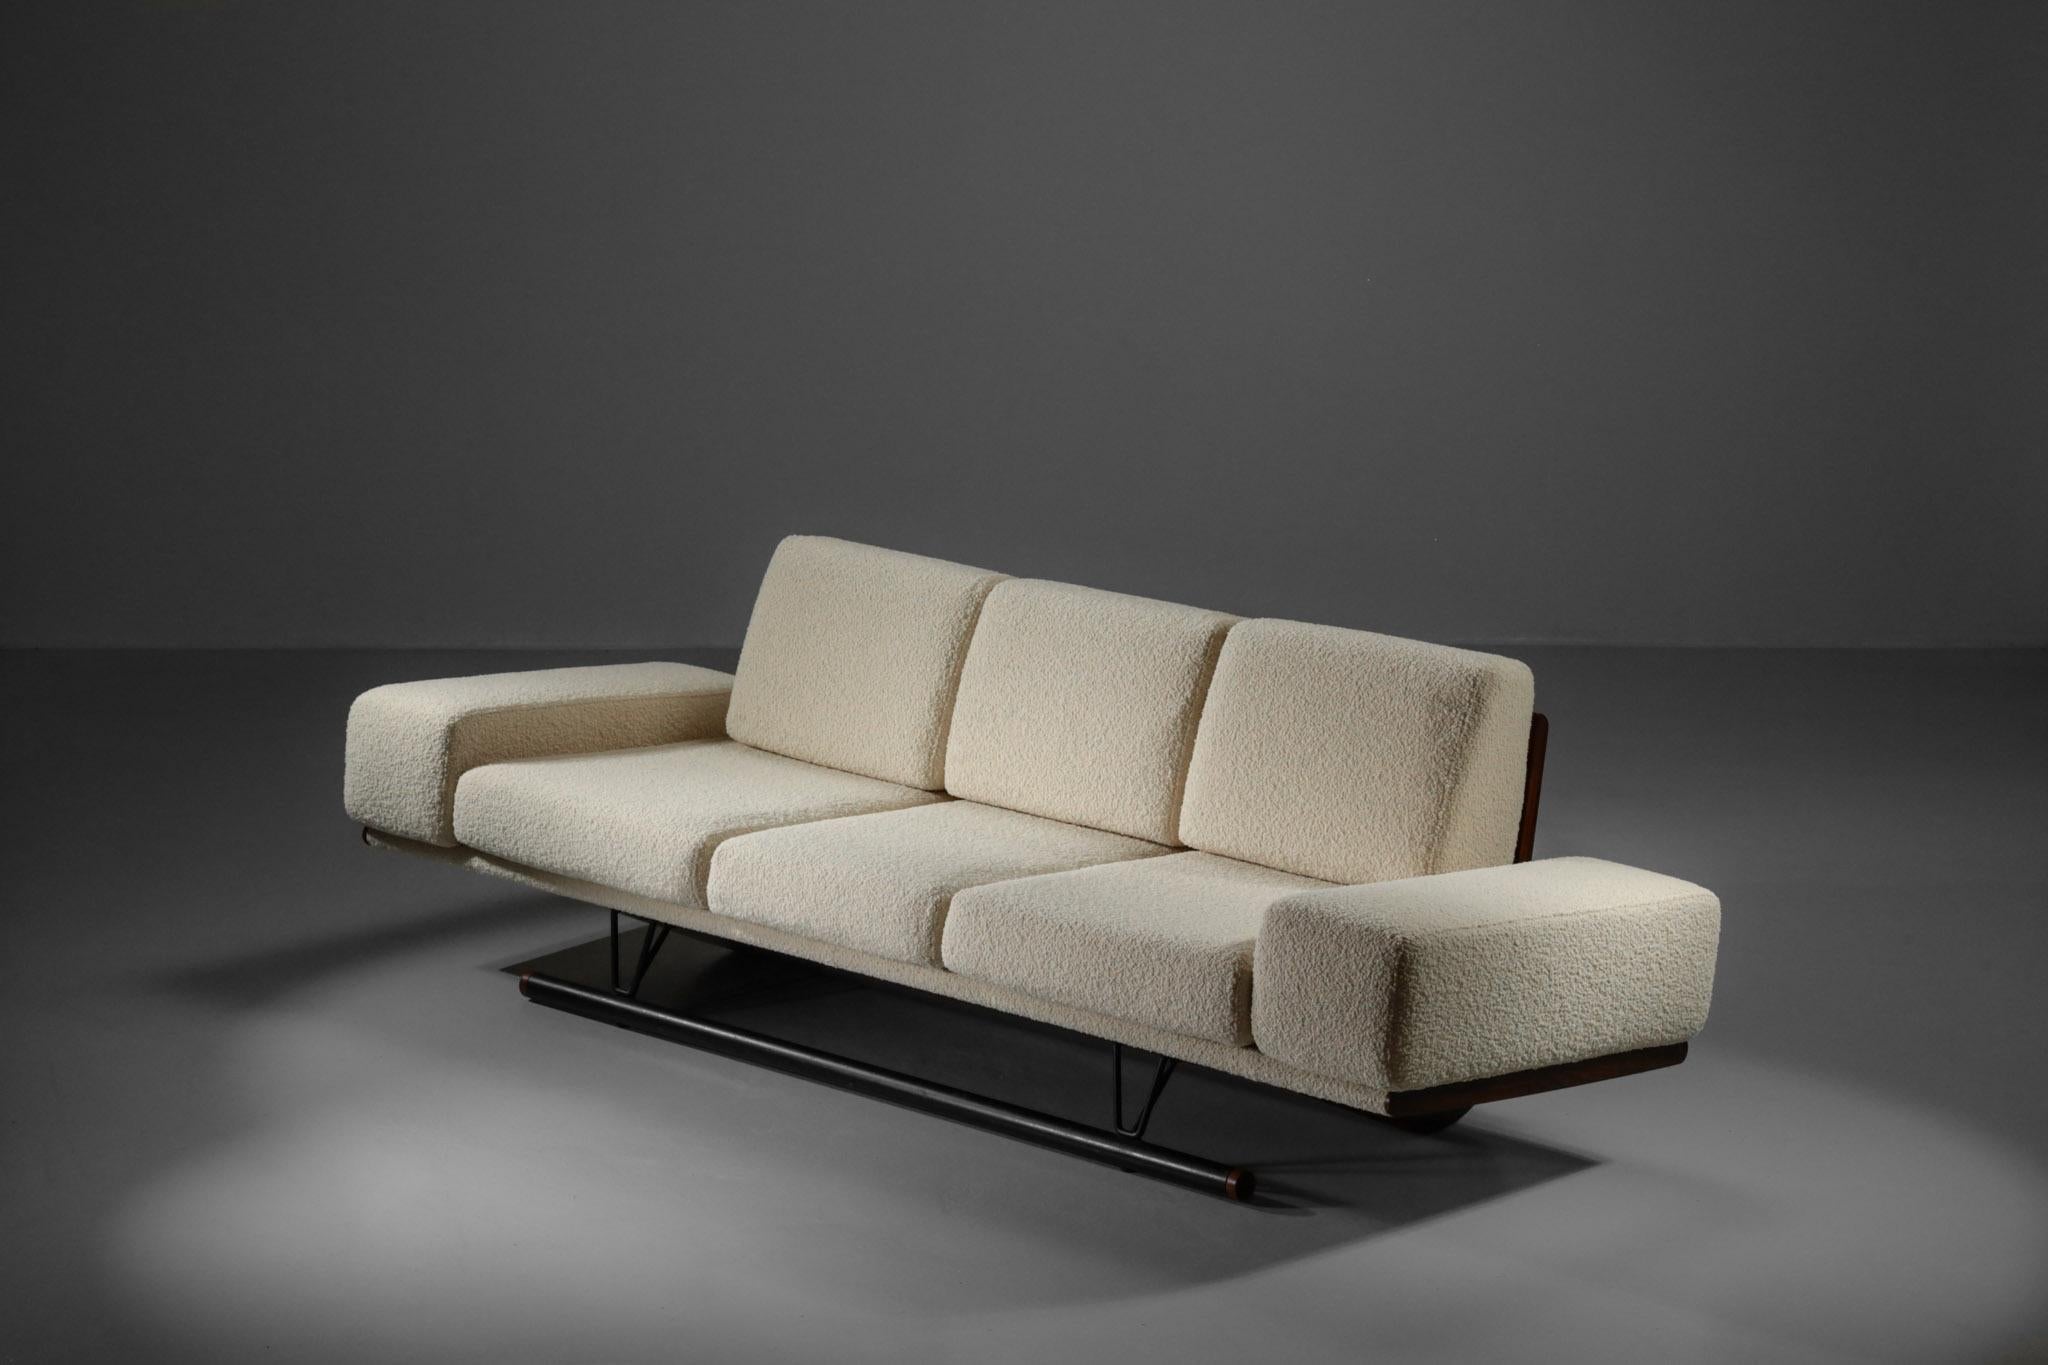 Rare polar sofa from 1970s
Structure in iron and rosewood.
Fully reupholstered with Bergamo 2 fabric from Bisson Bruneel.
 